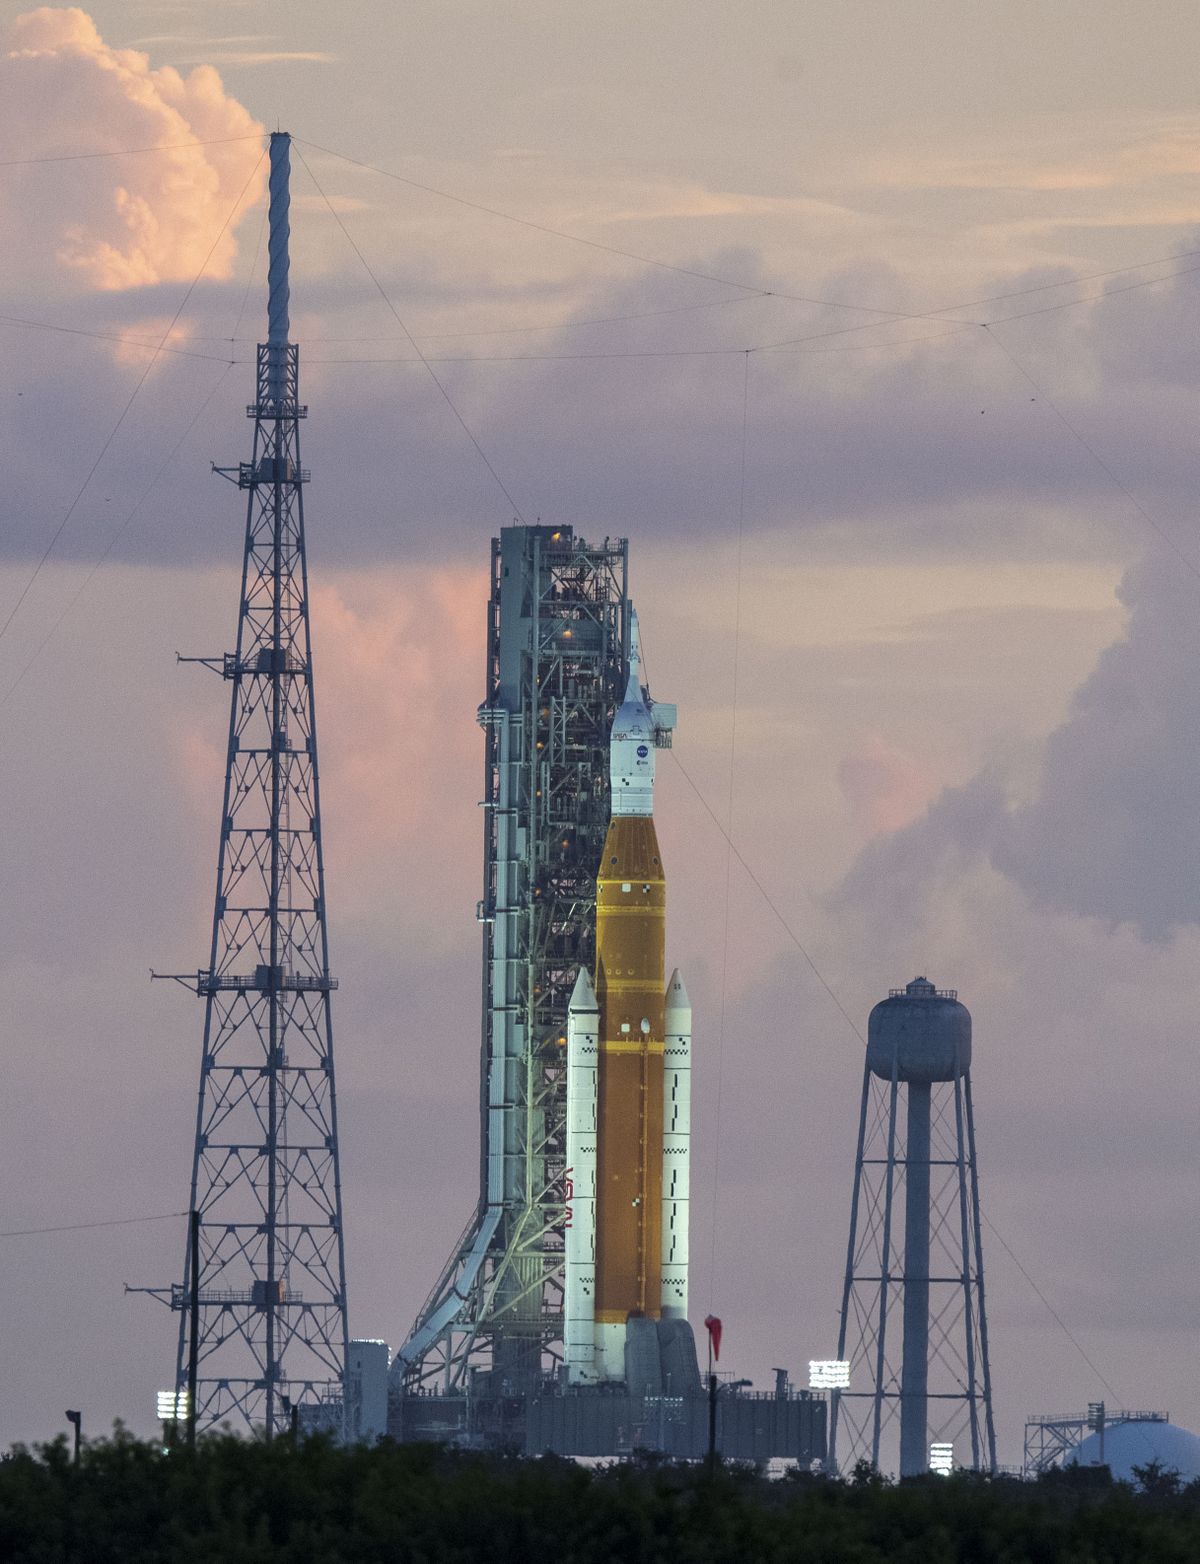 The Artemis I Orion capsule sits atop the Space Launch System (SLS) rocket on Launch Pad 39B as NASA prepares to send Orion to circle the moon. MUST CREDIT: Washington Post photo by Jonathan Newton.  (Jonathan Newton/The Washington Post)